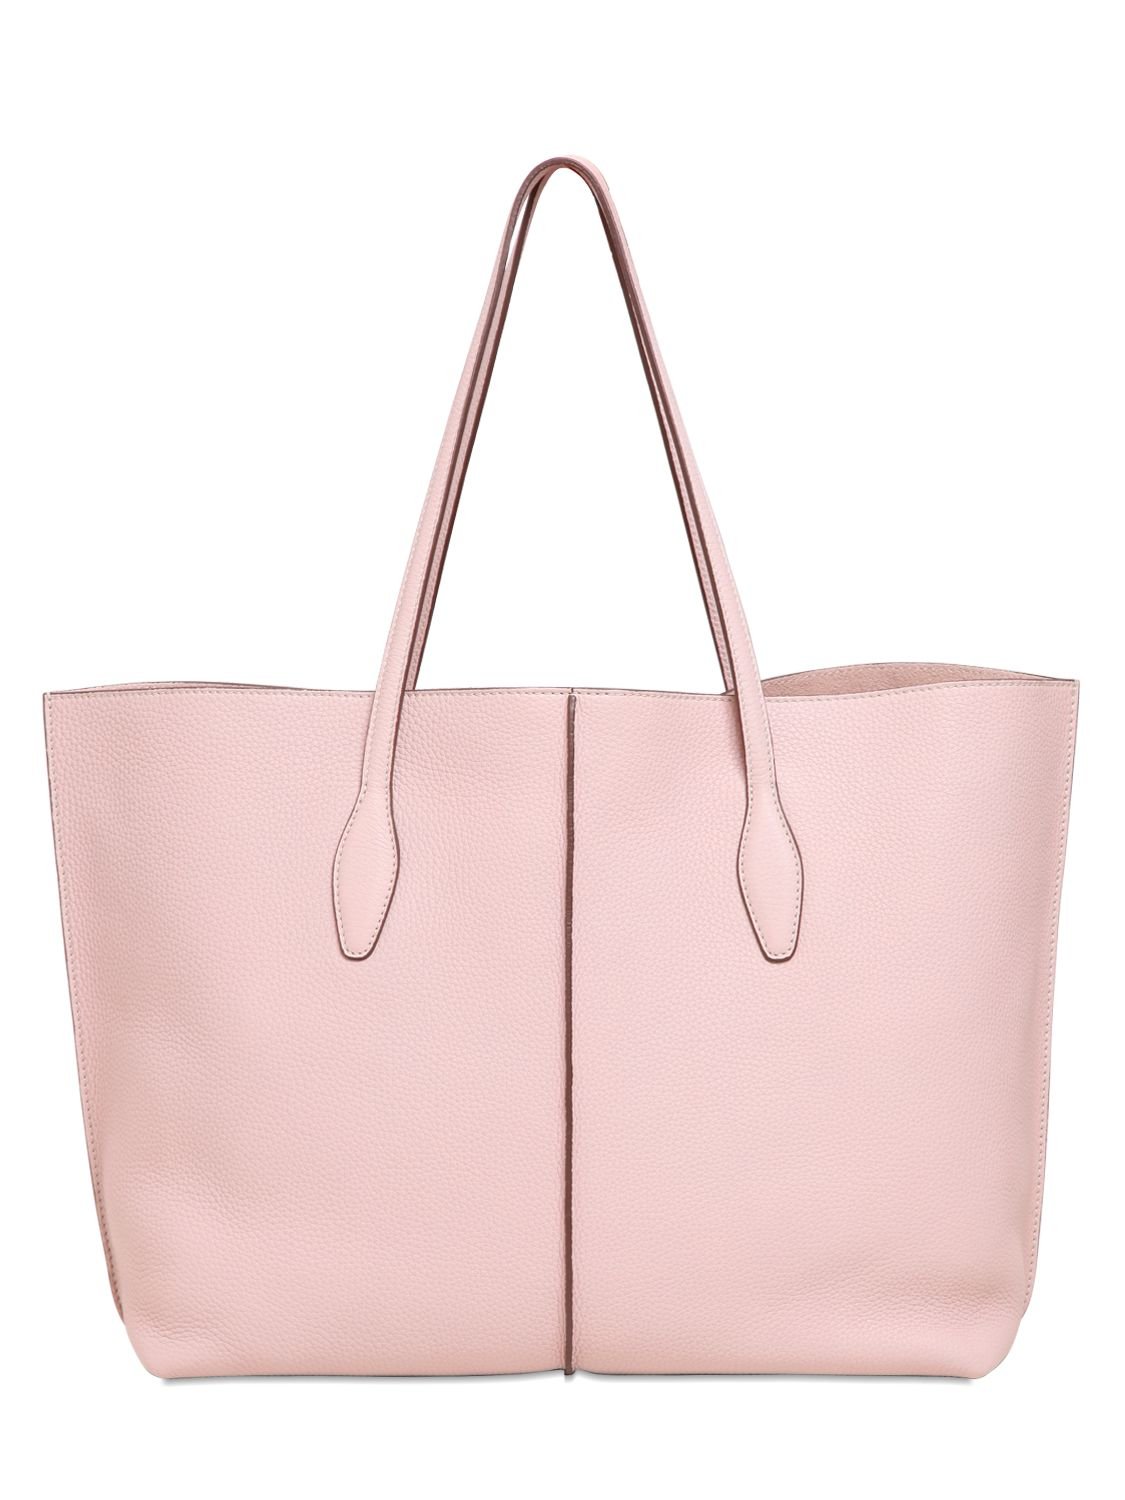 Tod&#39;s Large Joy Textured Leather Tote Bag in Light Pink (Pink) - Lyst